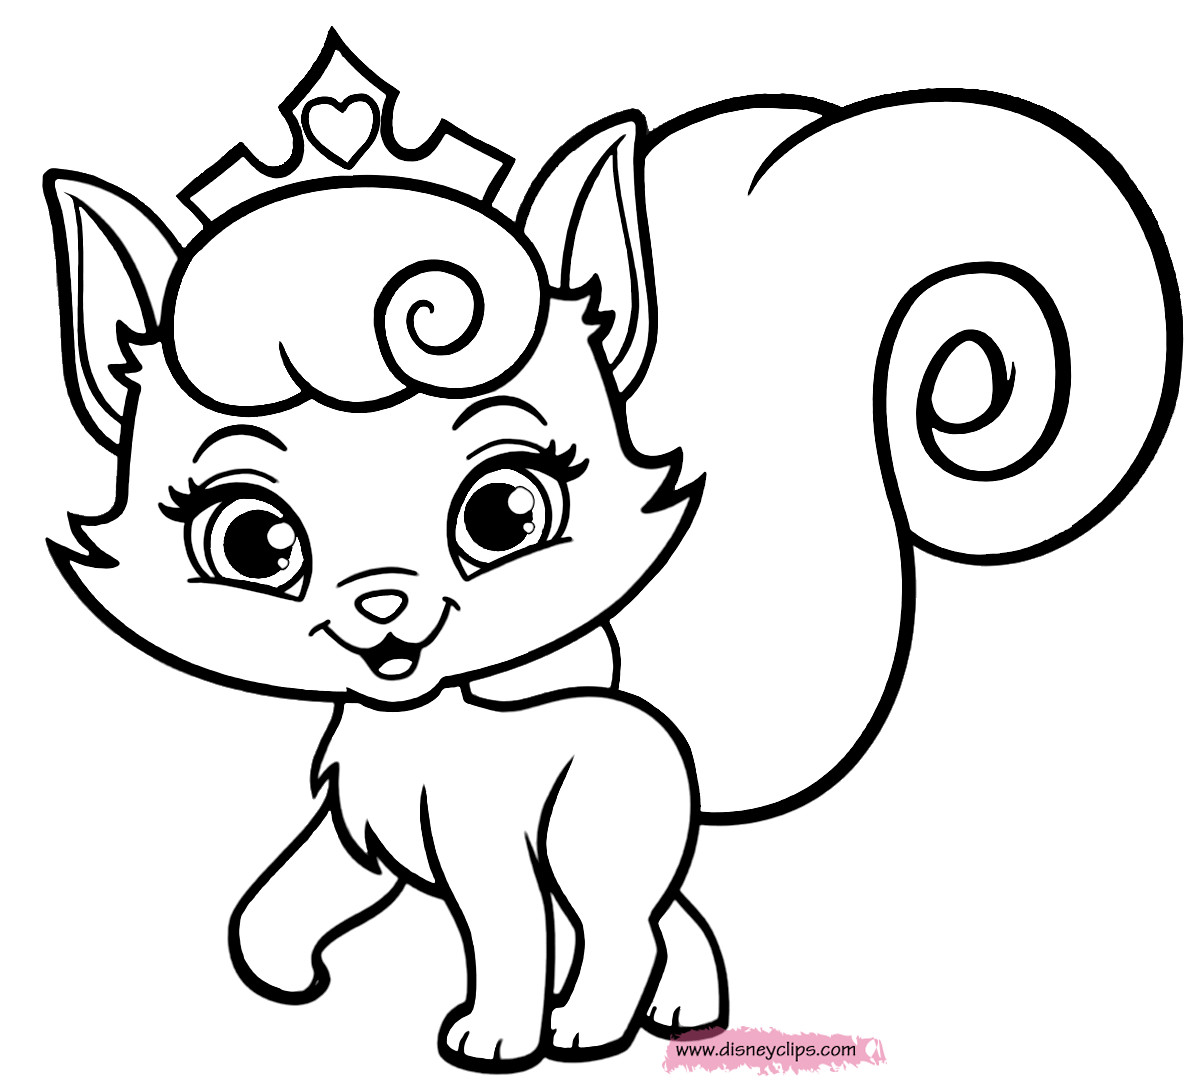 Kitten Printable Coloring Pages
 Kitten And Puppy Coloring Pages To Print Coloring Home